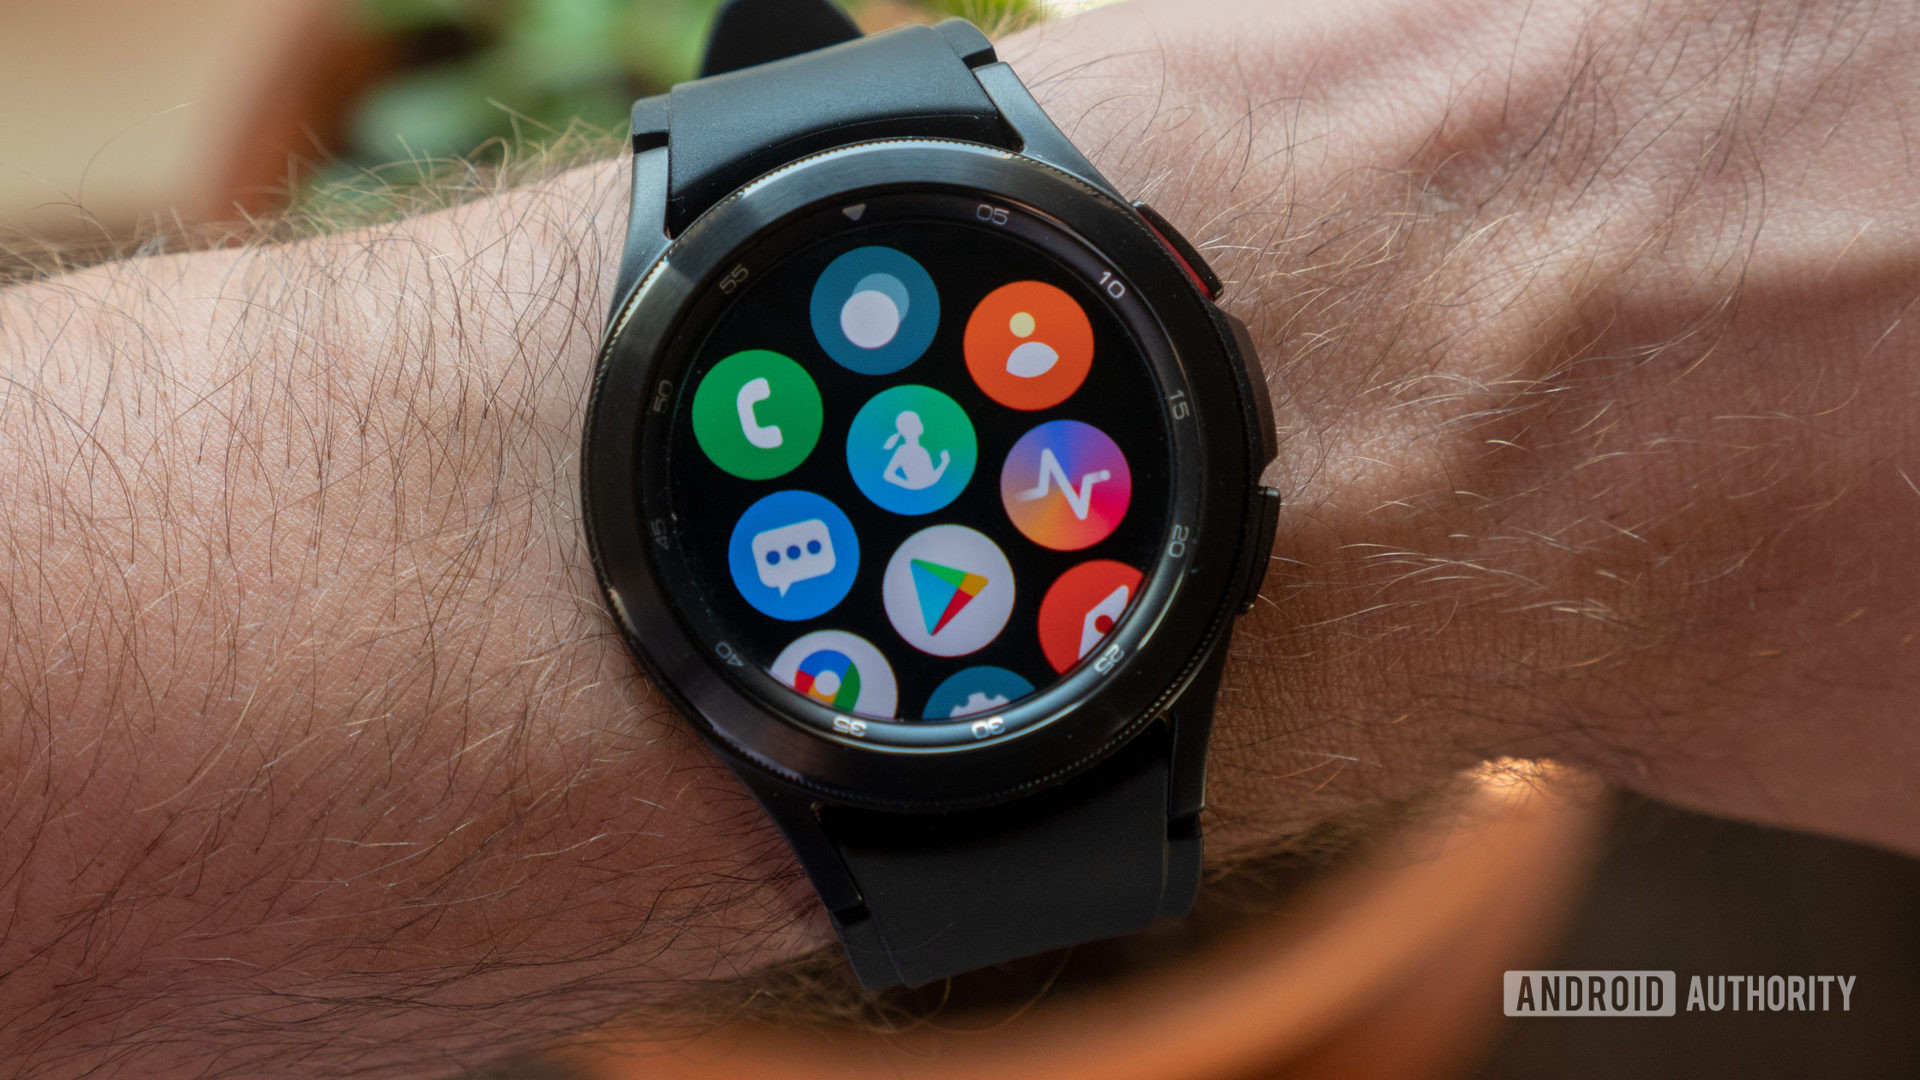 The Samsung Galaxy Watch 4 Classic on wrist showing the all apps screen containing Samsung Health, the Google Play Store, and others